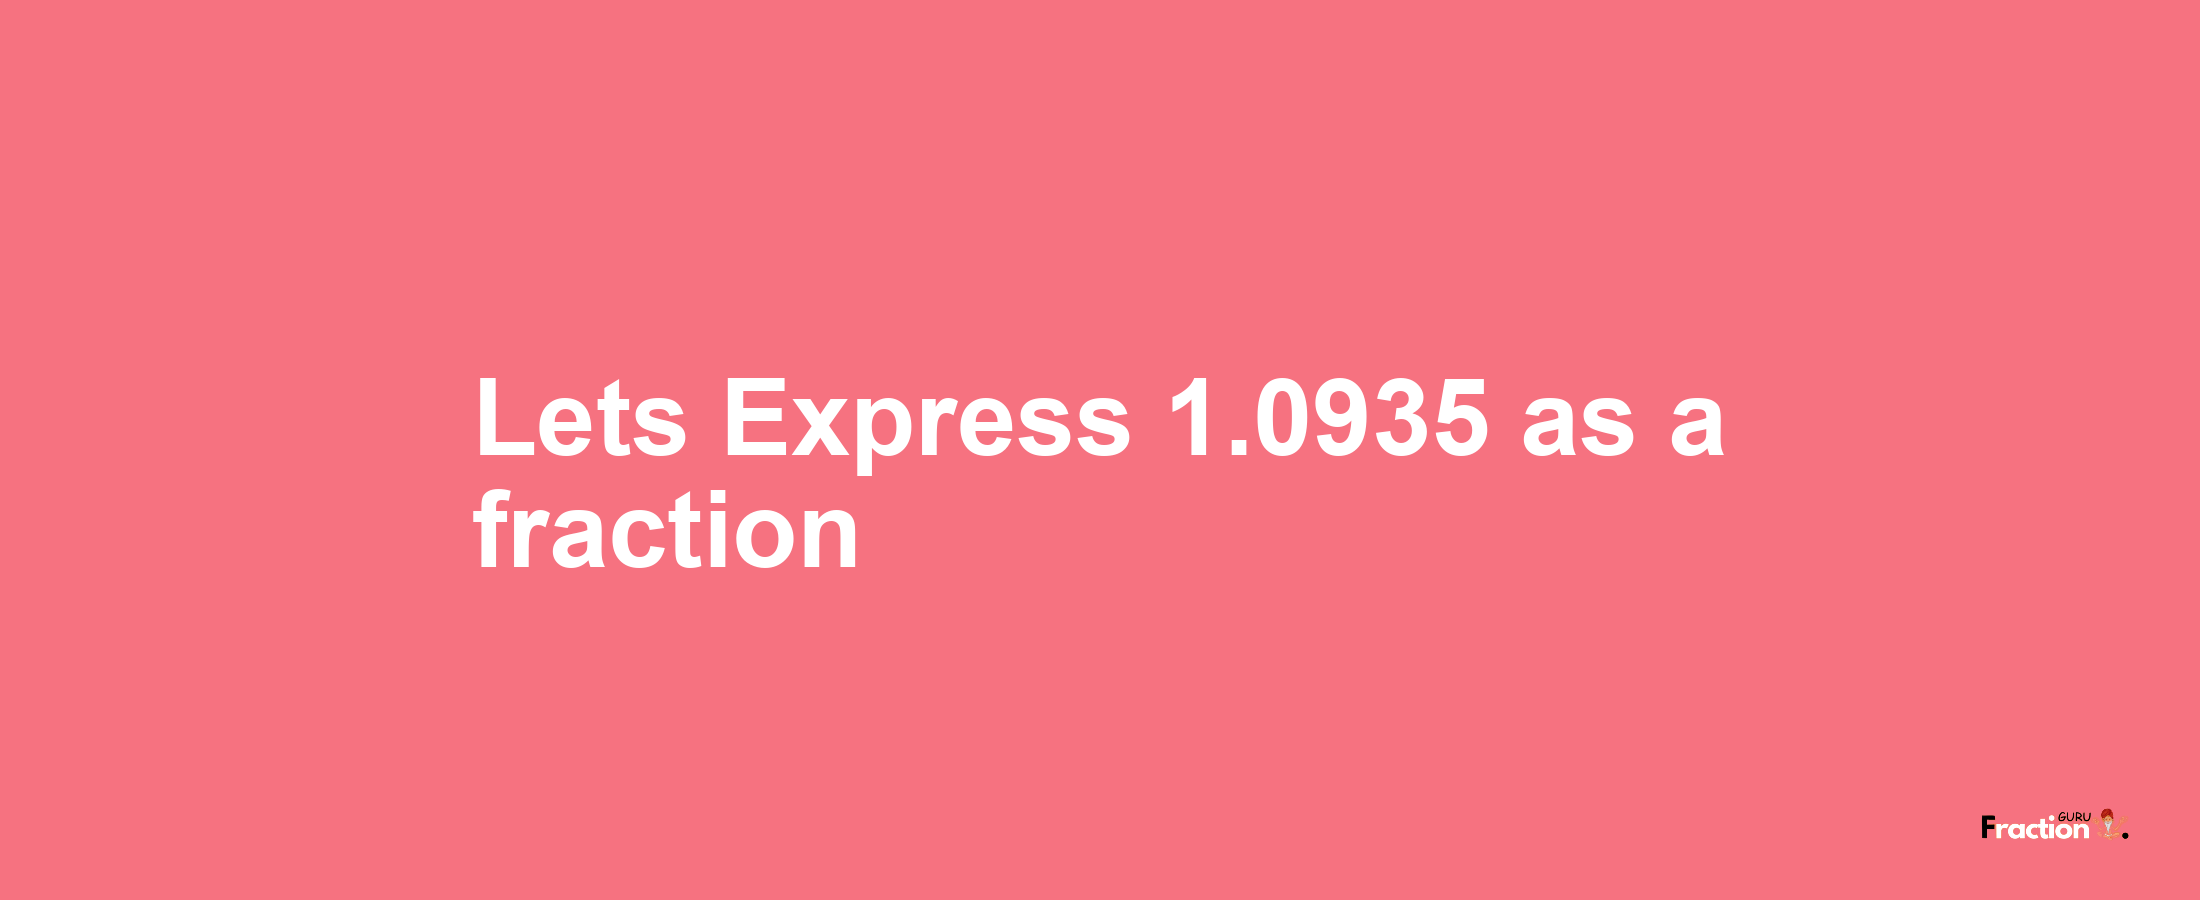 Lets Express 1.0935 as afraction